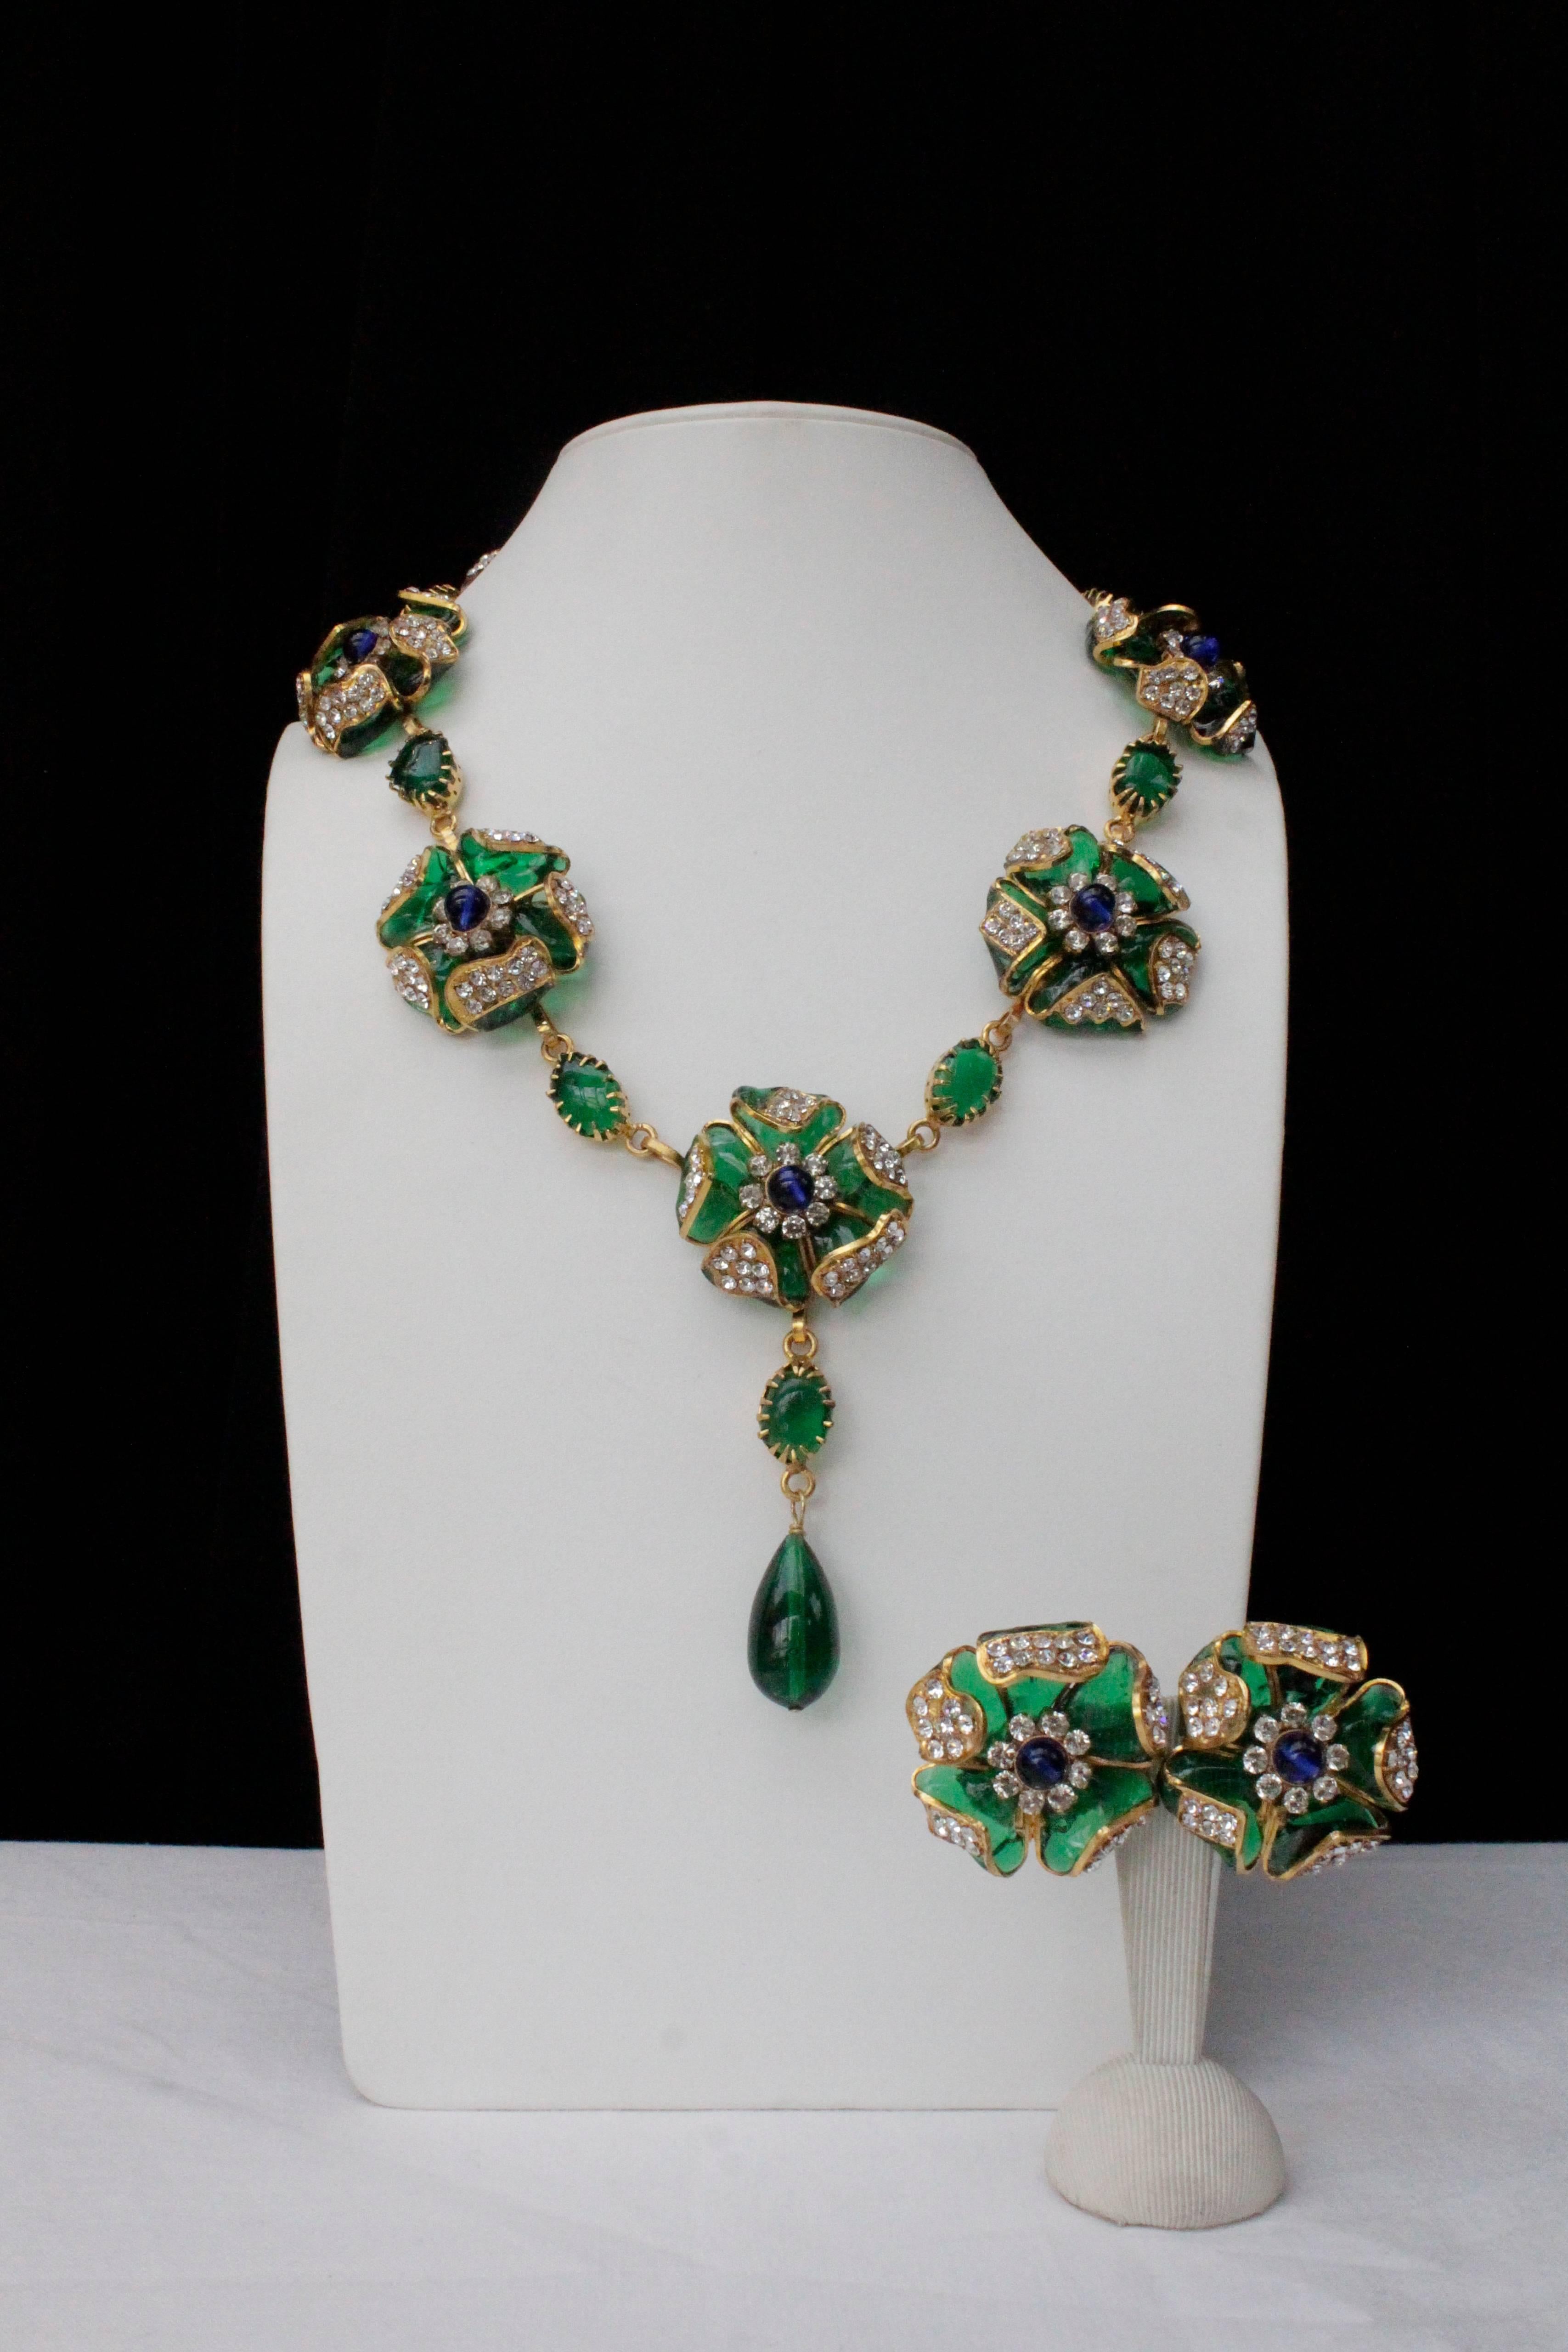 CHANEL (Made in France) Exceptional demi-parure comprised of a necklace and a pair of earrings. The necklace is composed of seven flowers separated by emerald oval glass paste cabochons finished with an emerald  tear-drop pendant. Each flower of the